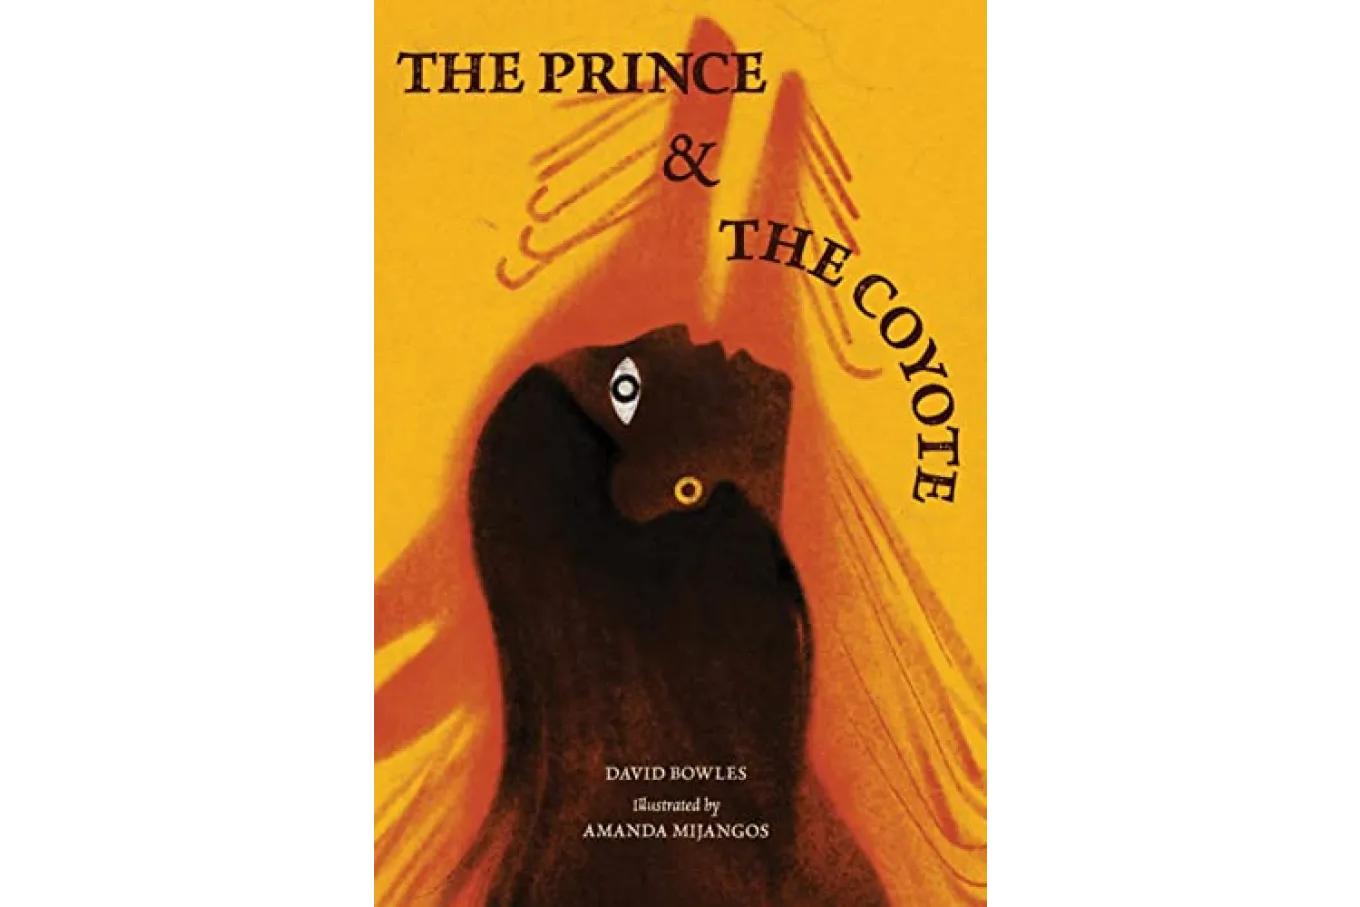 Cover of the prince and the coyote